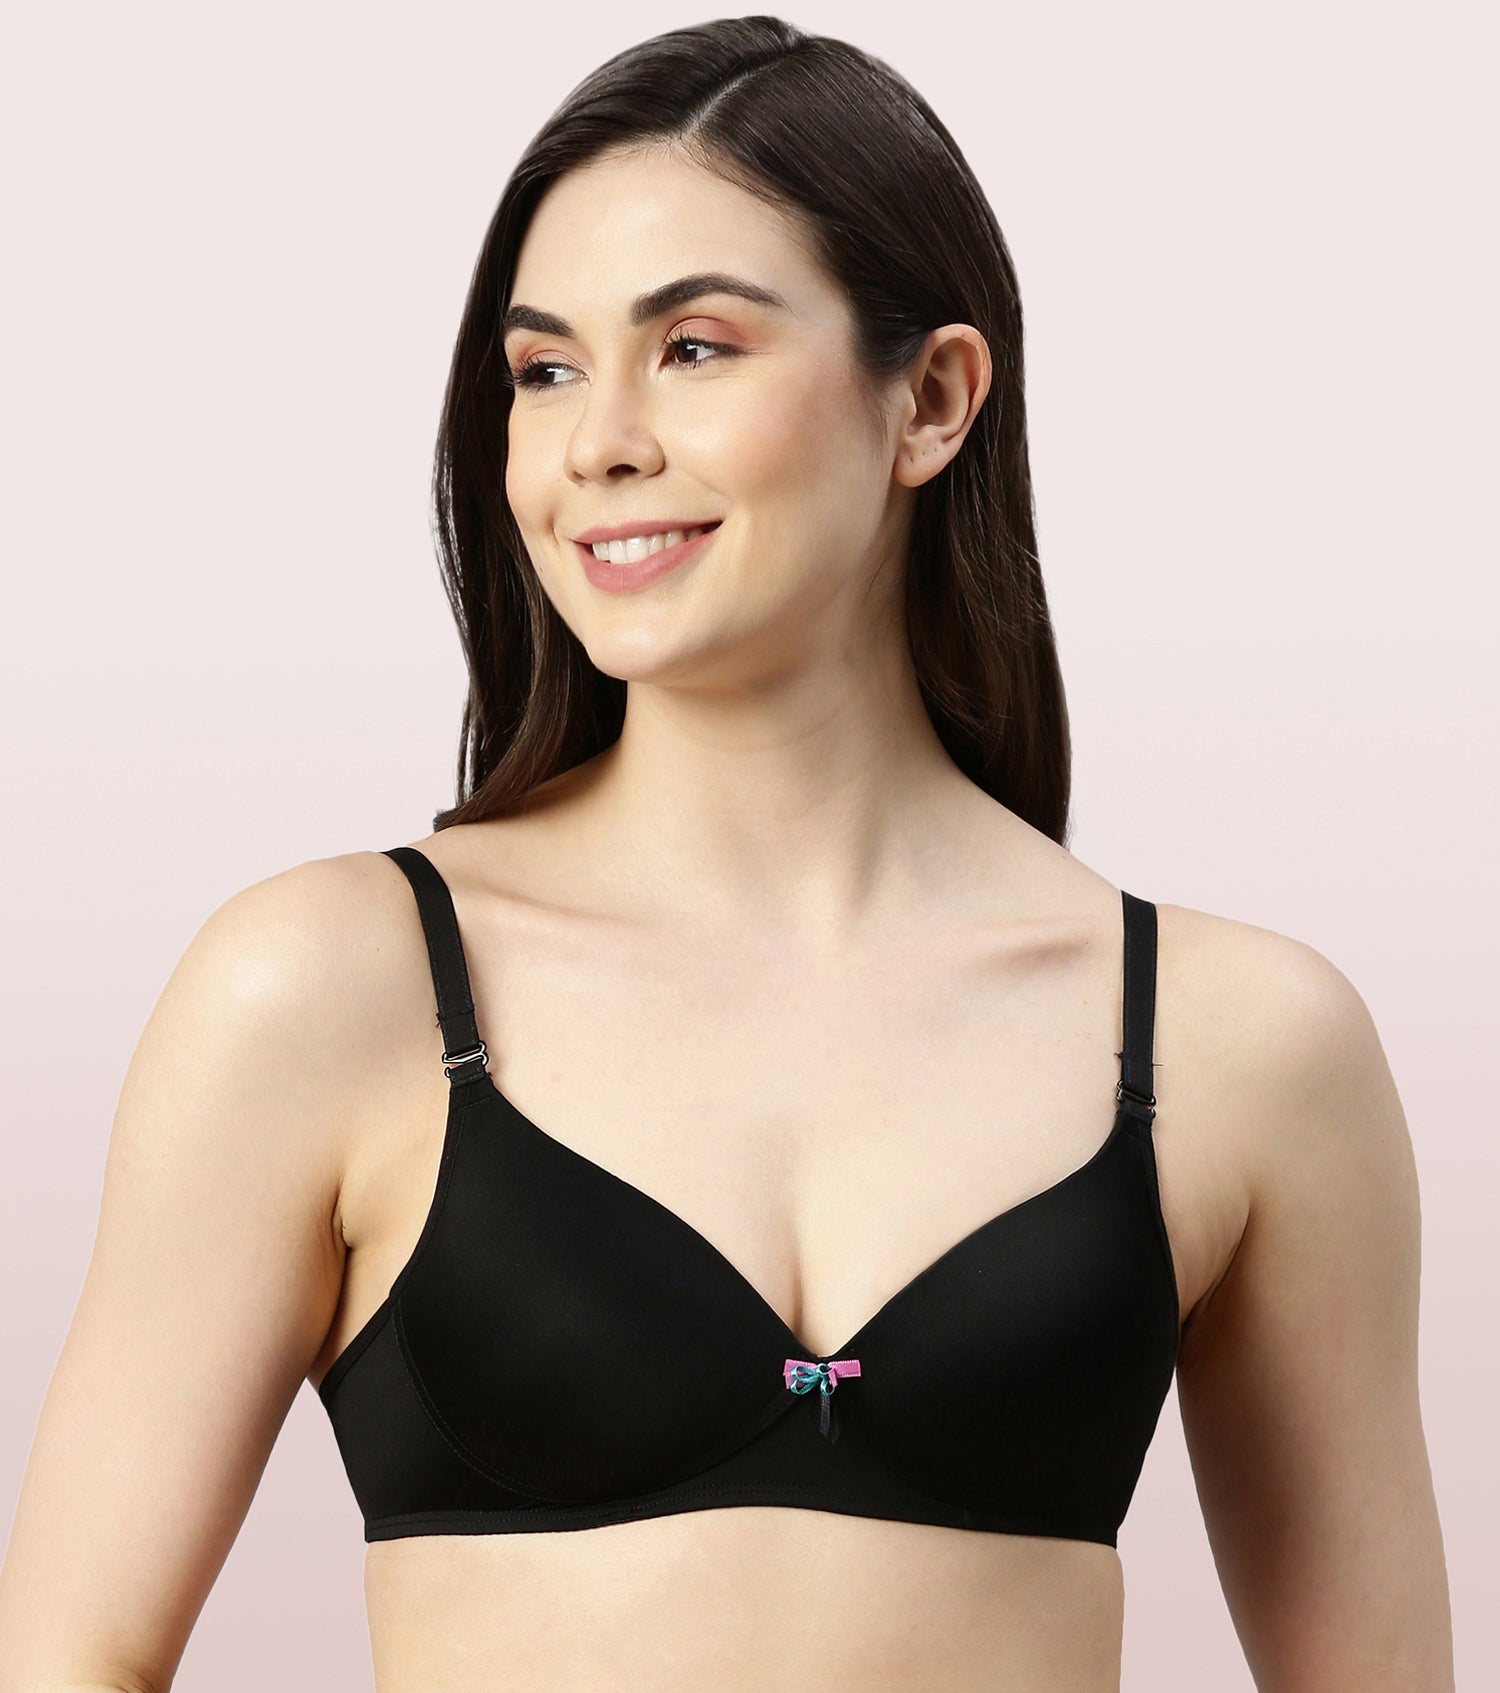 Enamor Rosette Womens Bra - Get Best Price from Manufacturers